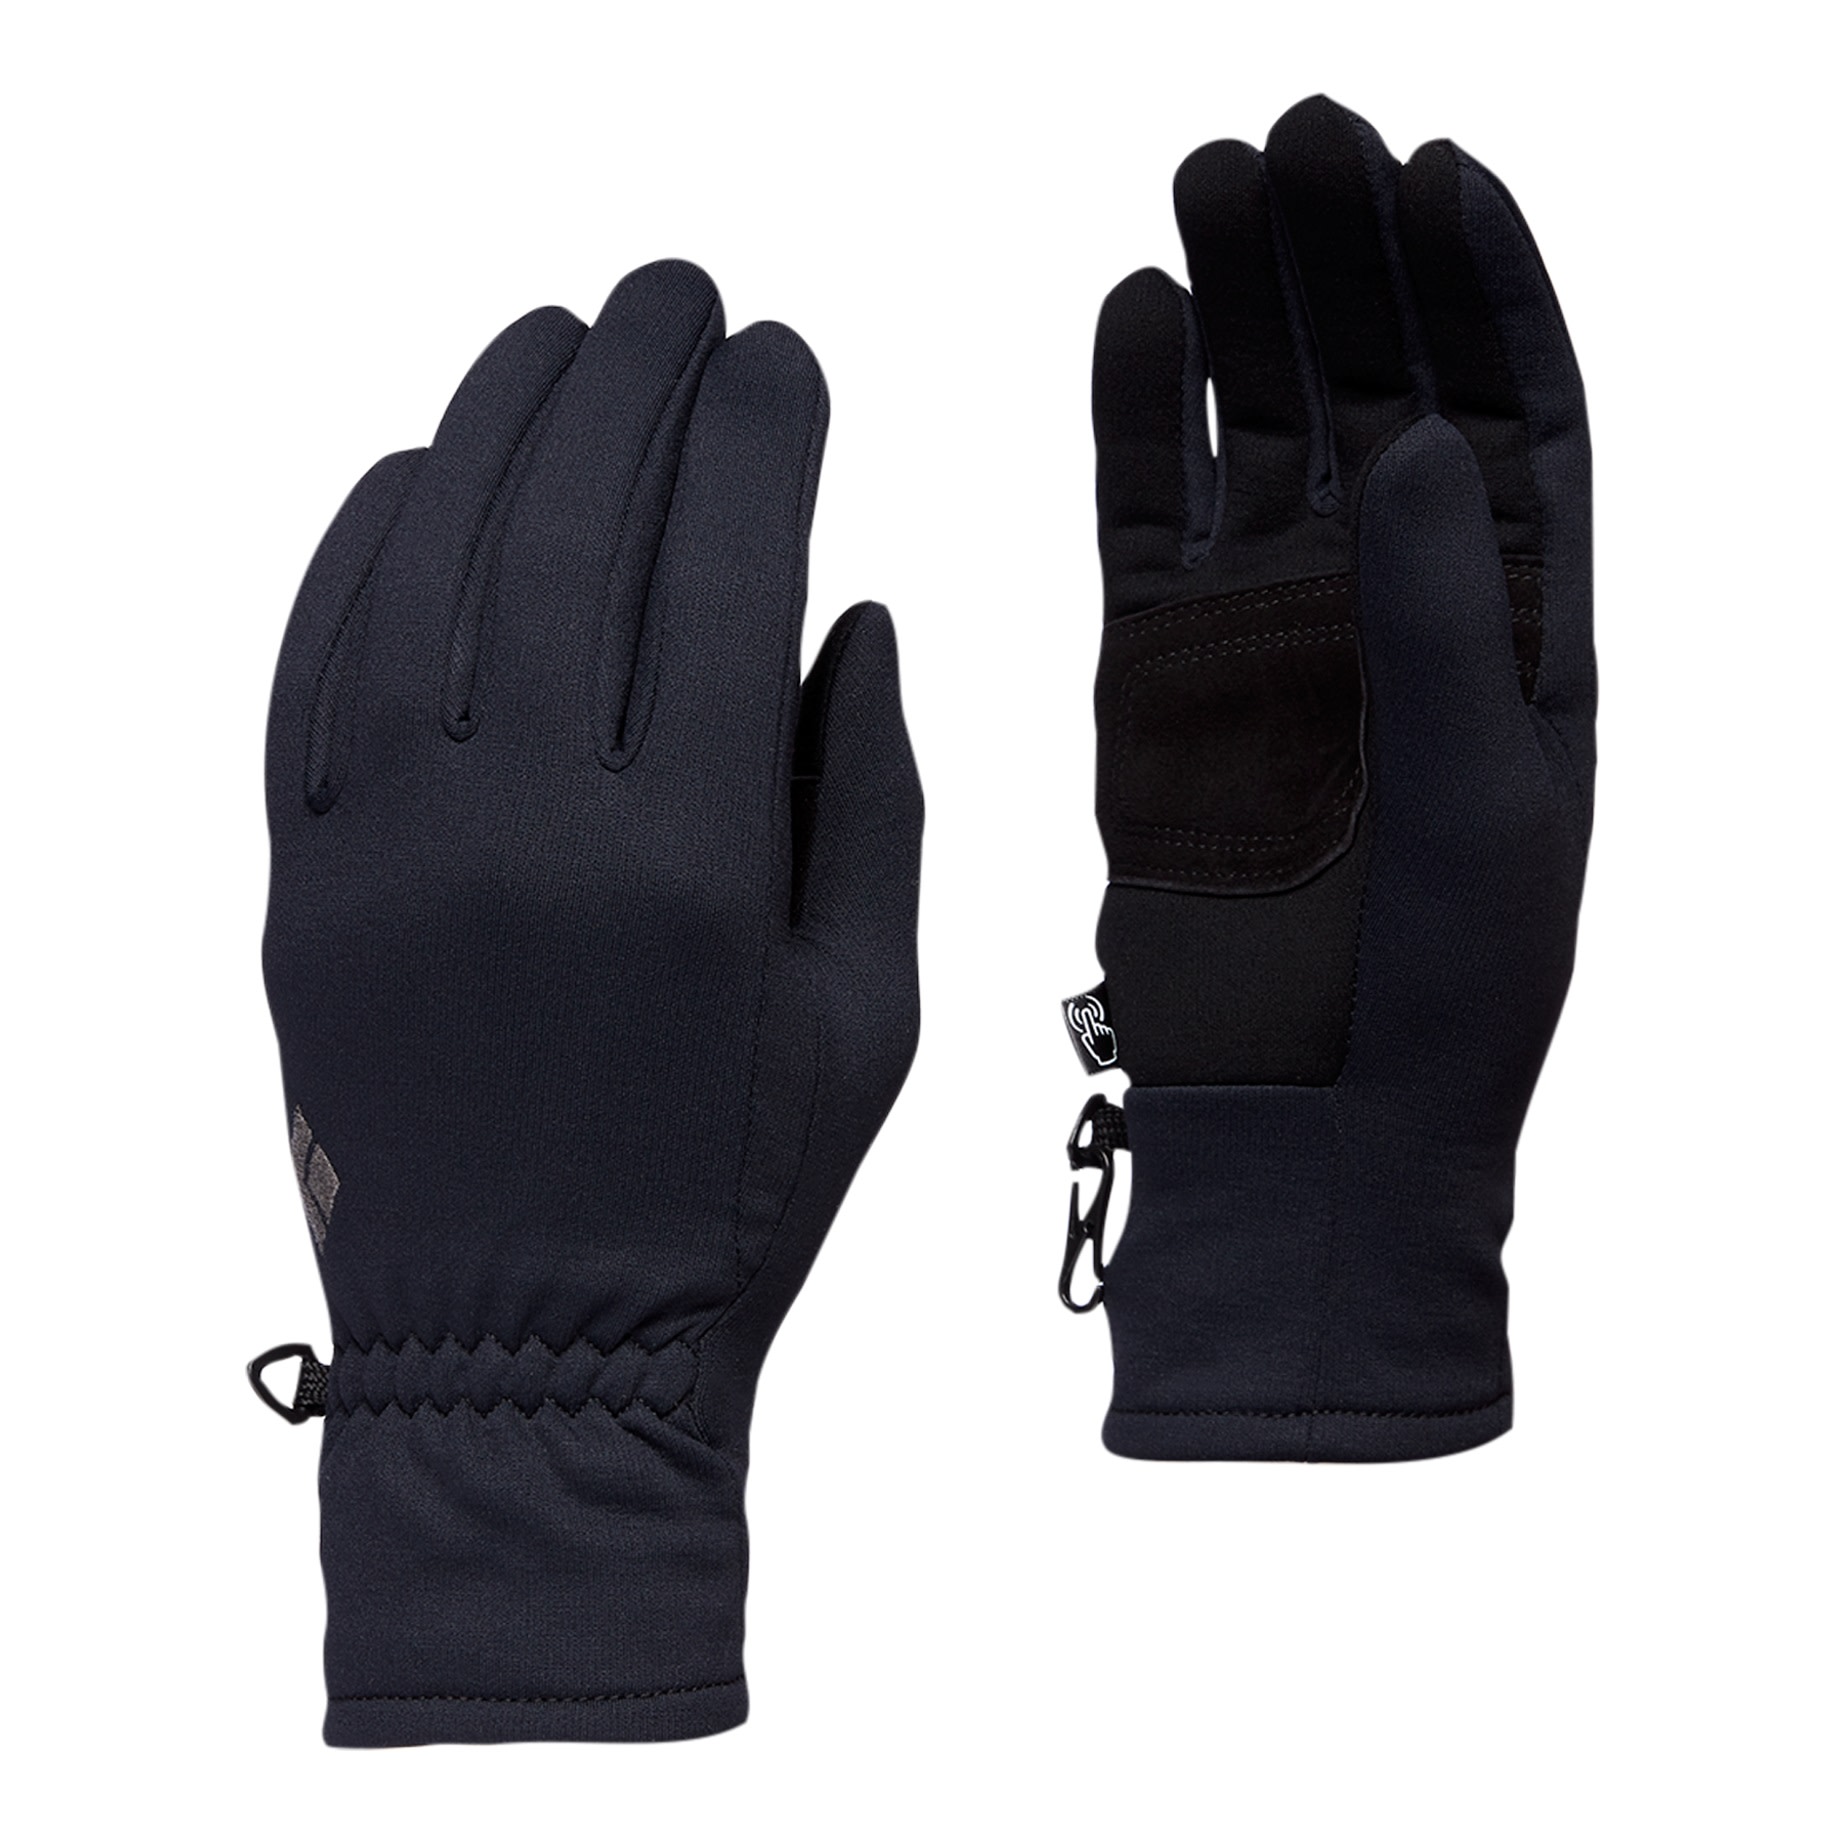 Unisex MidWeight ScreenTap Gloves No Color